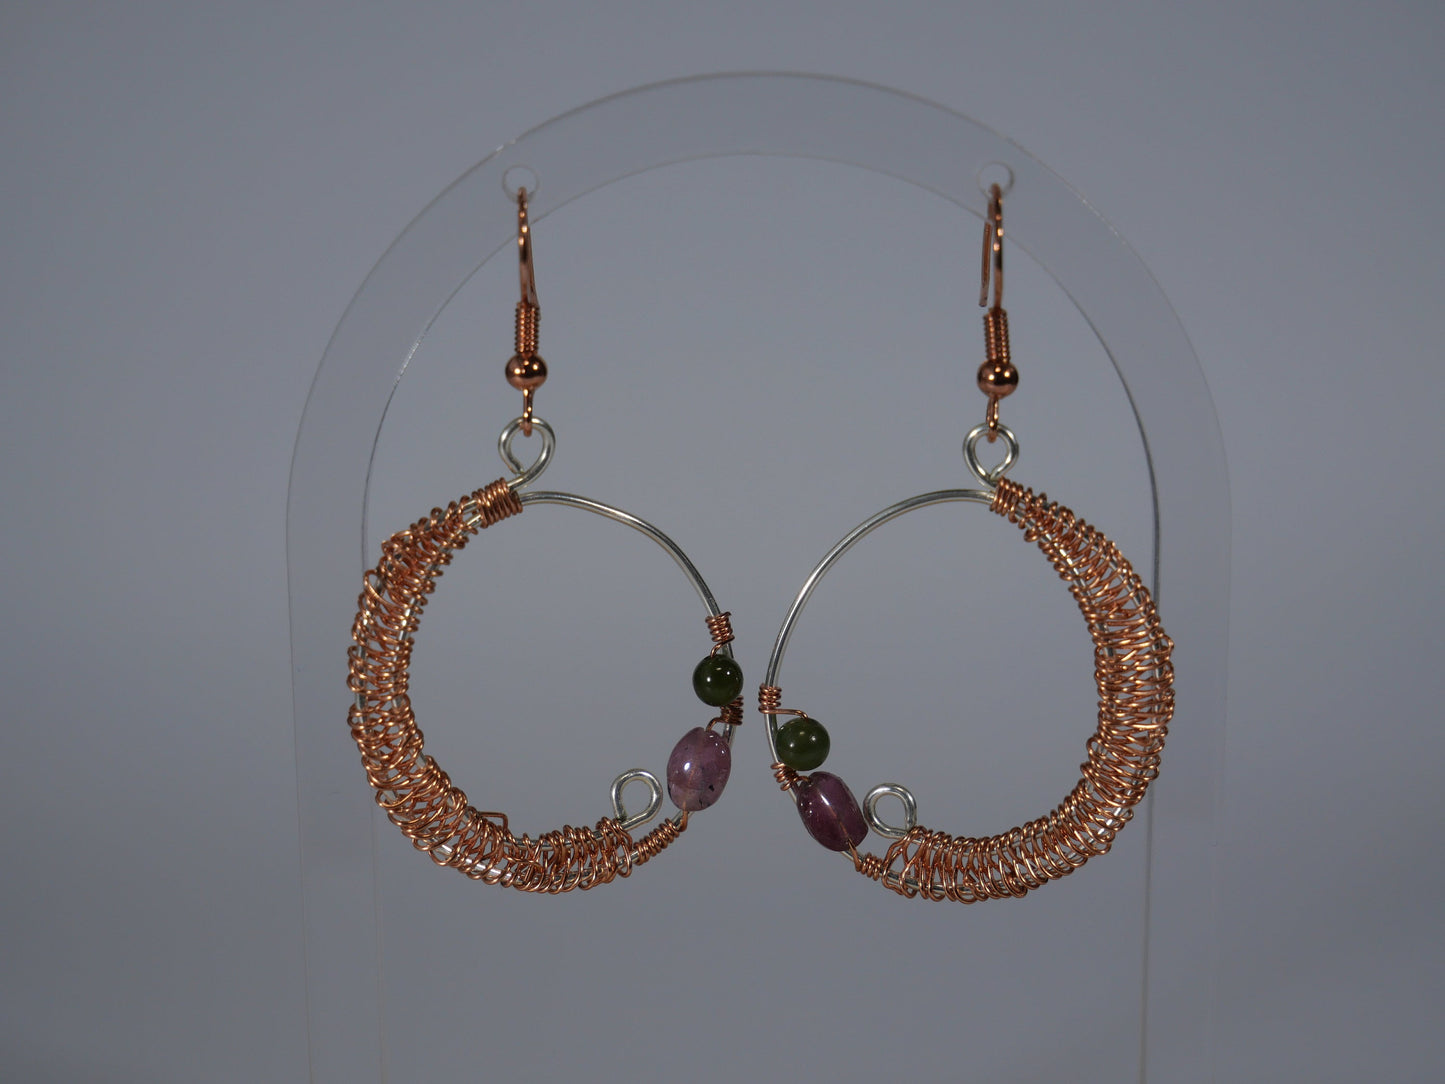 Abstract Wire Earrings, Silver, Copper & Watermelon Tourmaline inspired by Maine, Made in Maine, Maine Art, Maine Jewelry